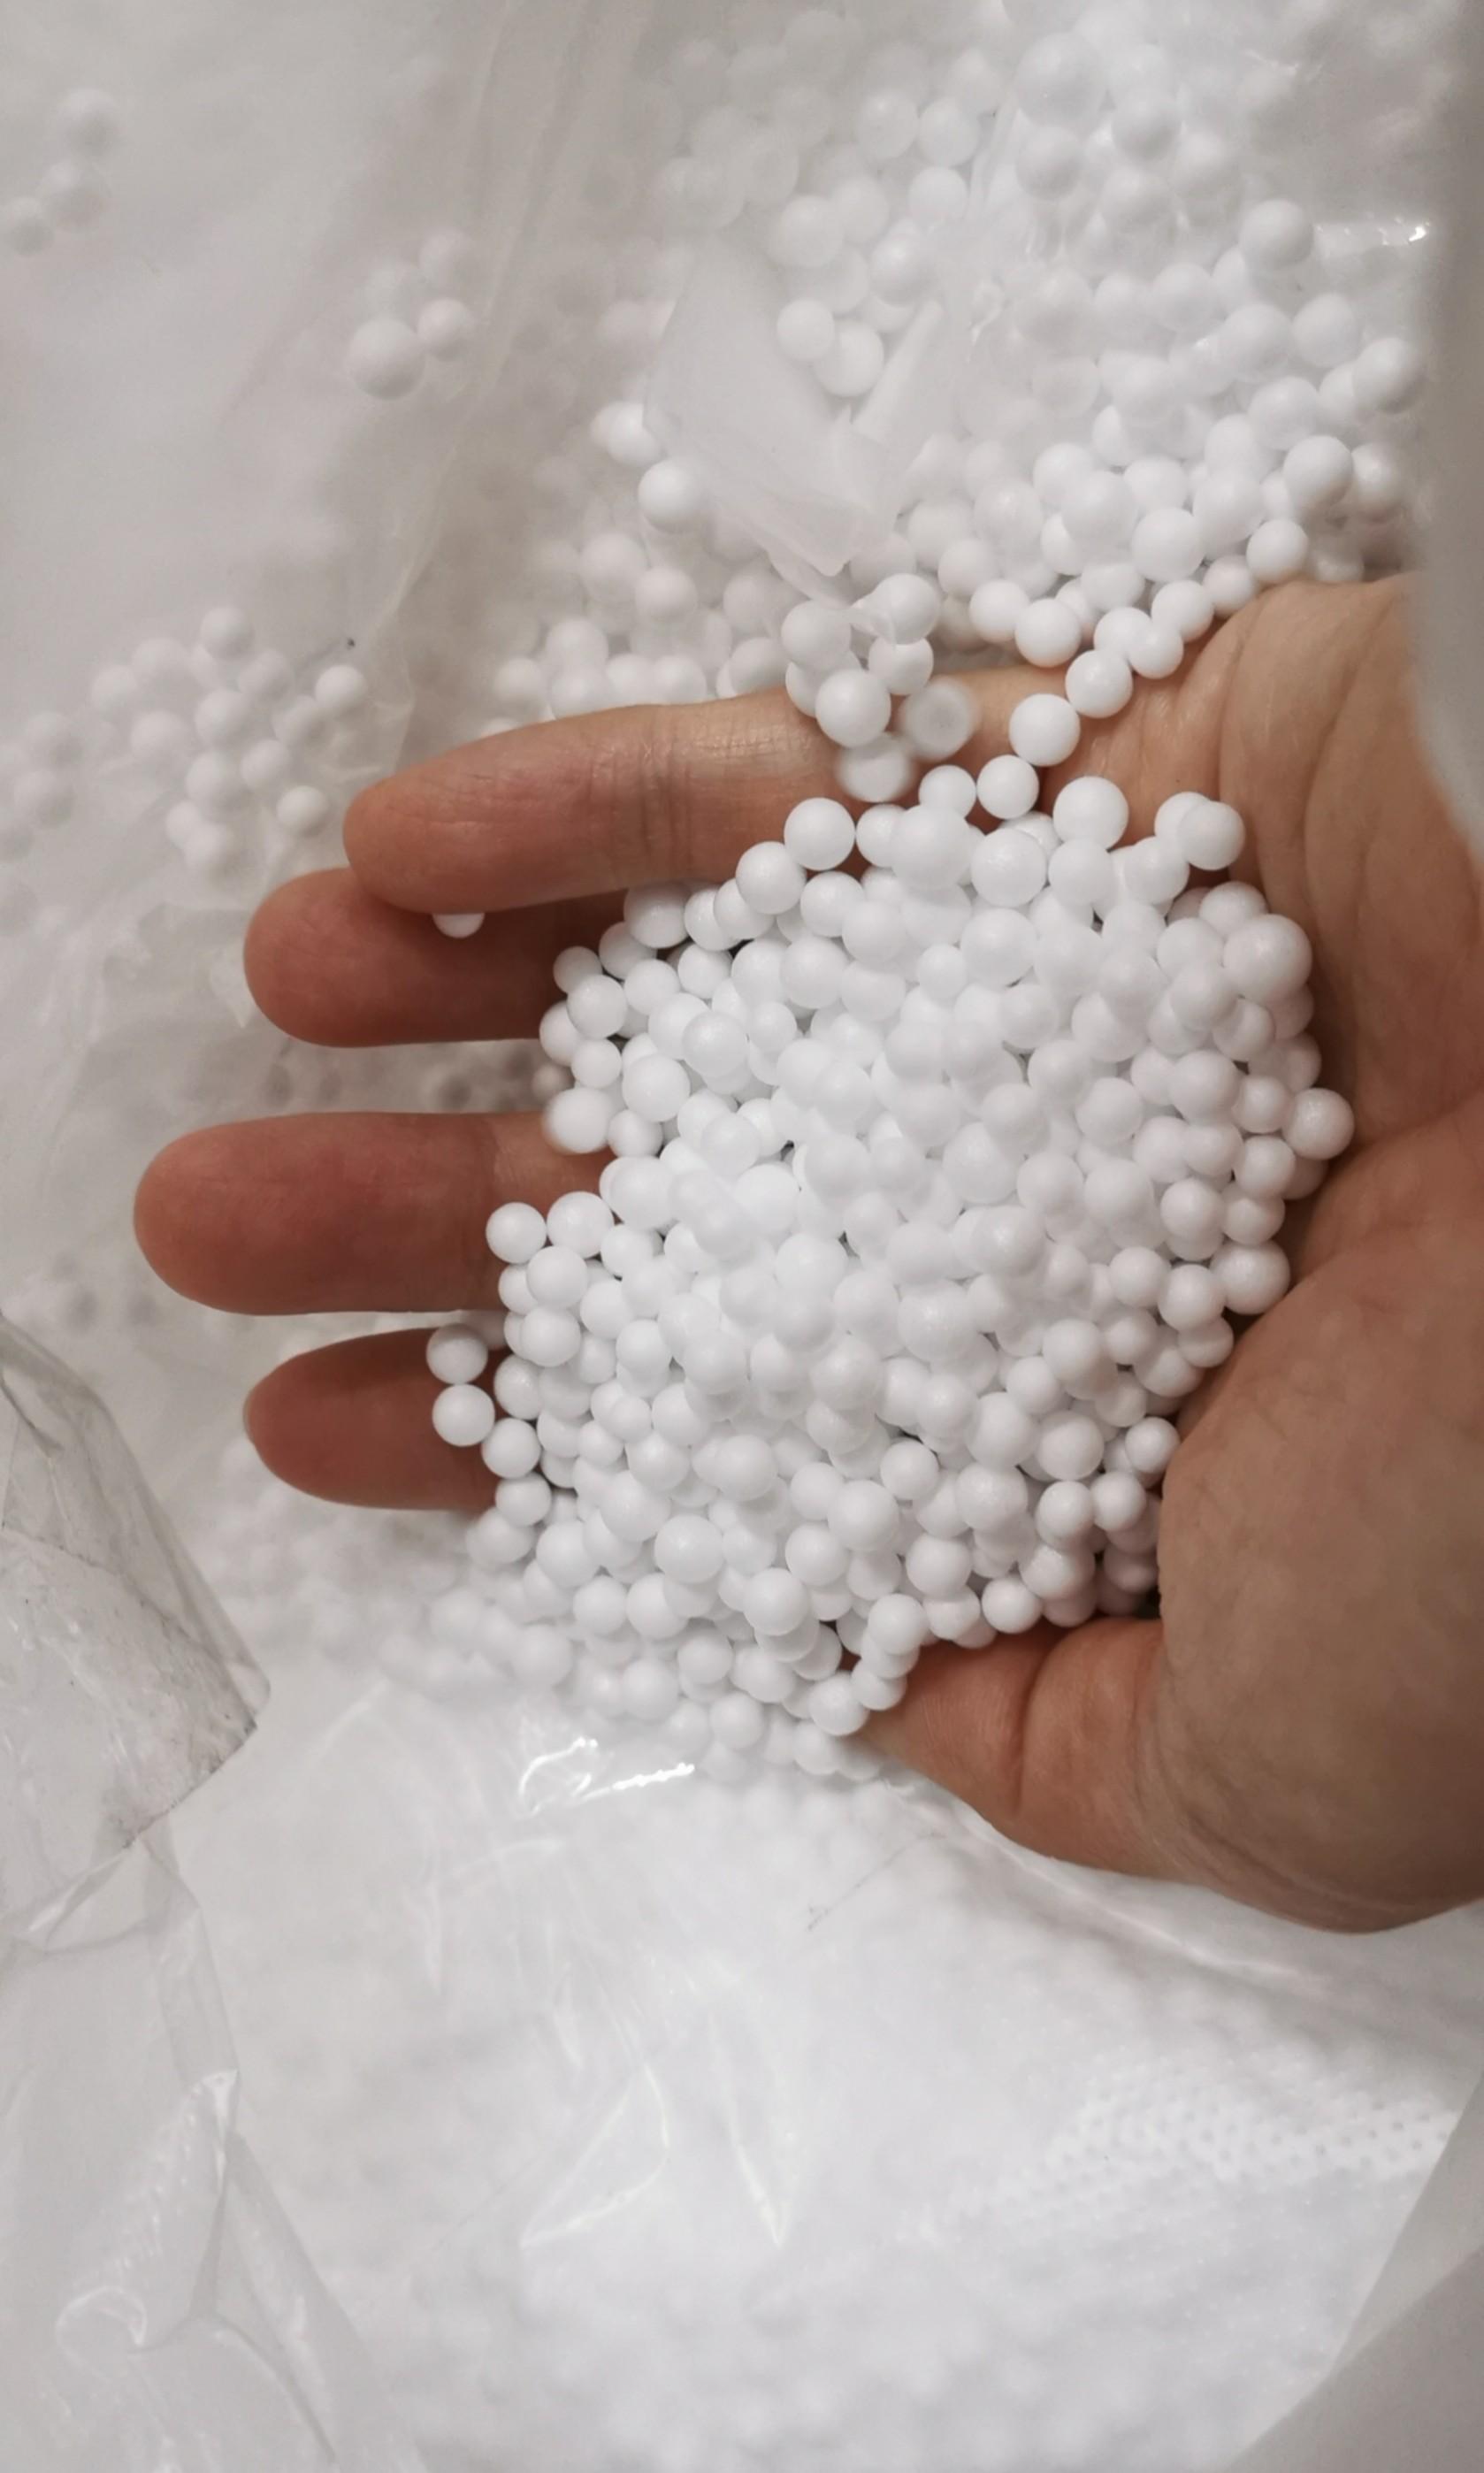 BEAN BAG REFILL BEADS 1KG Larger Fluffy Beads Poly FOAM for EAST Malaysia  Sabah Sarawak Only